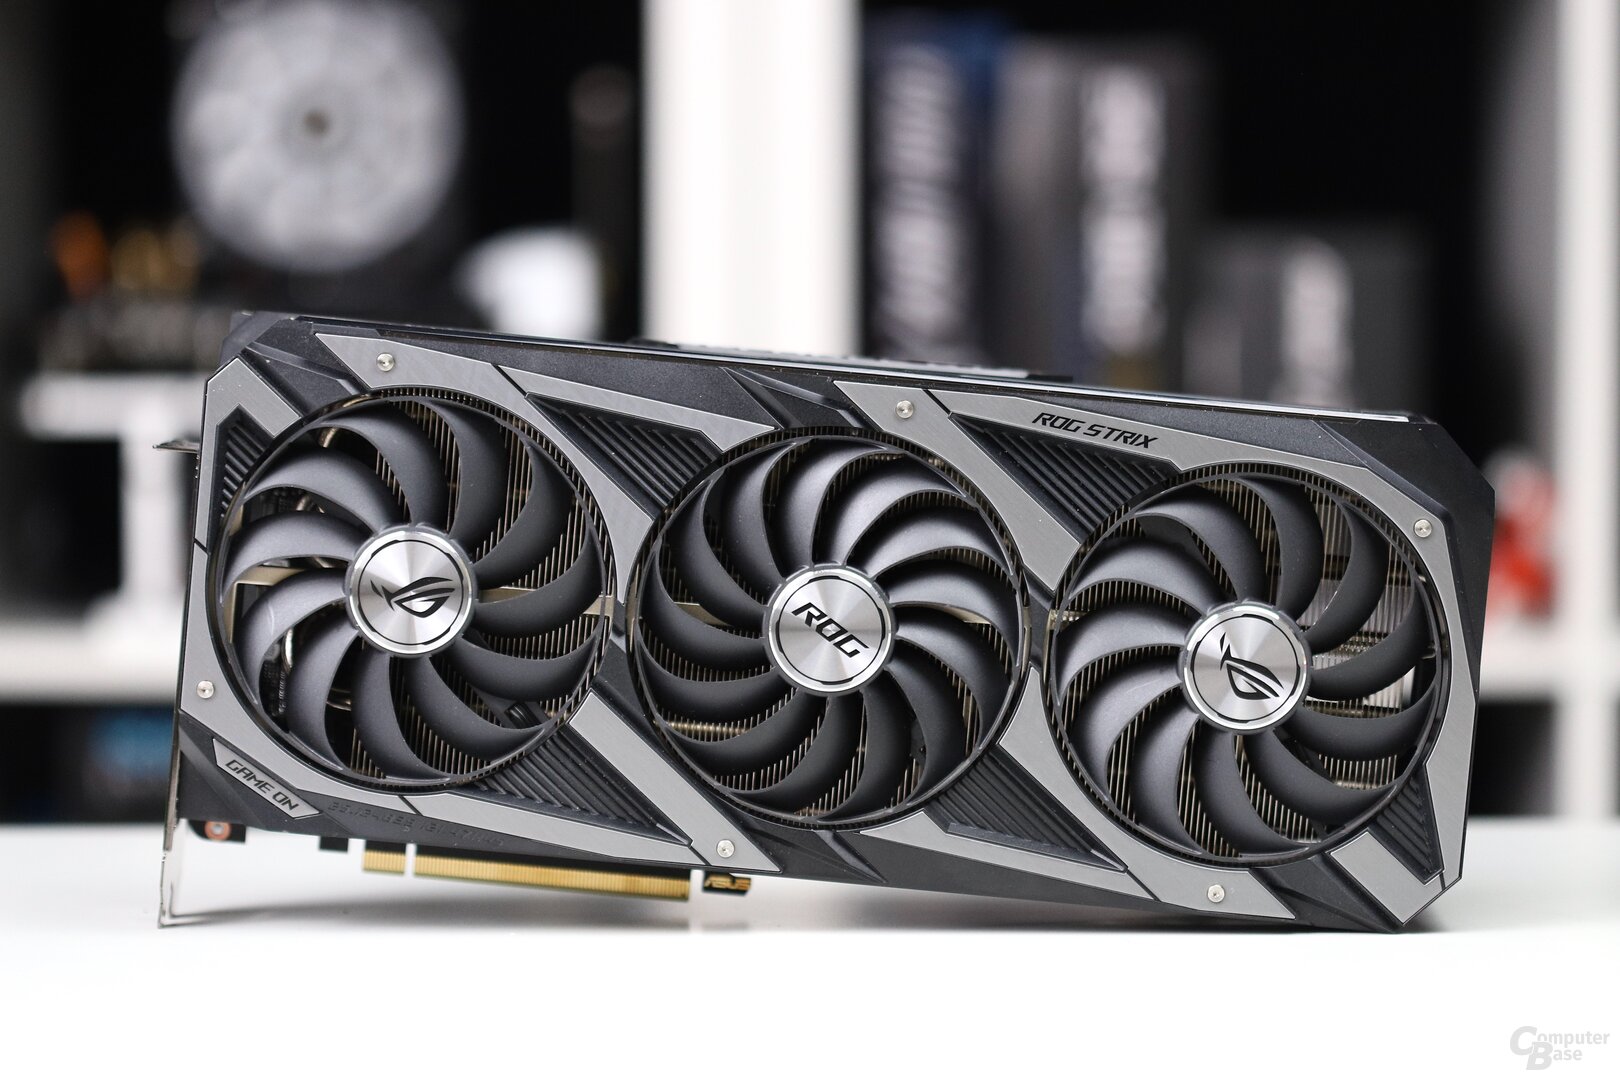 The Asus GeForce RTX 3090 Strix OC in the test